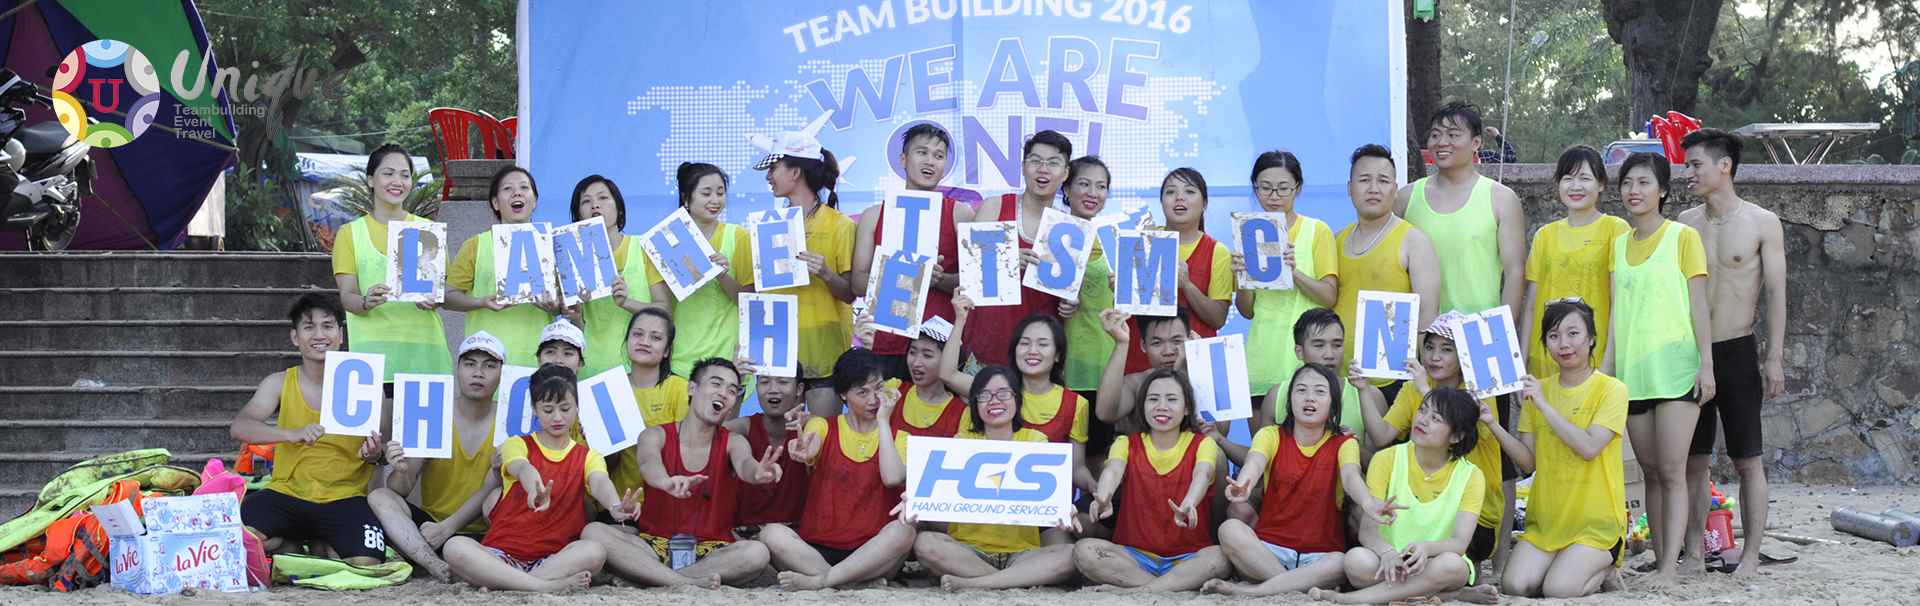 HGS - WE ARE ONE TEAM